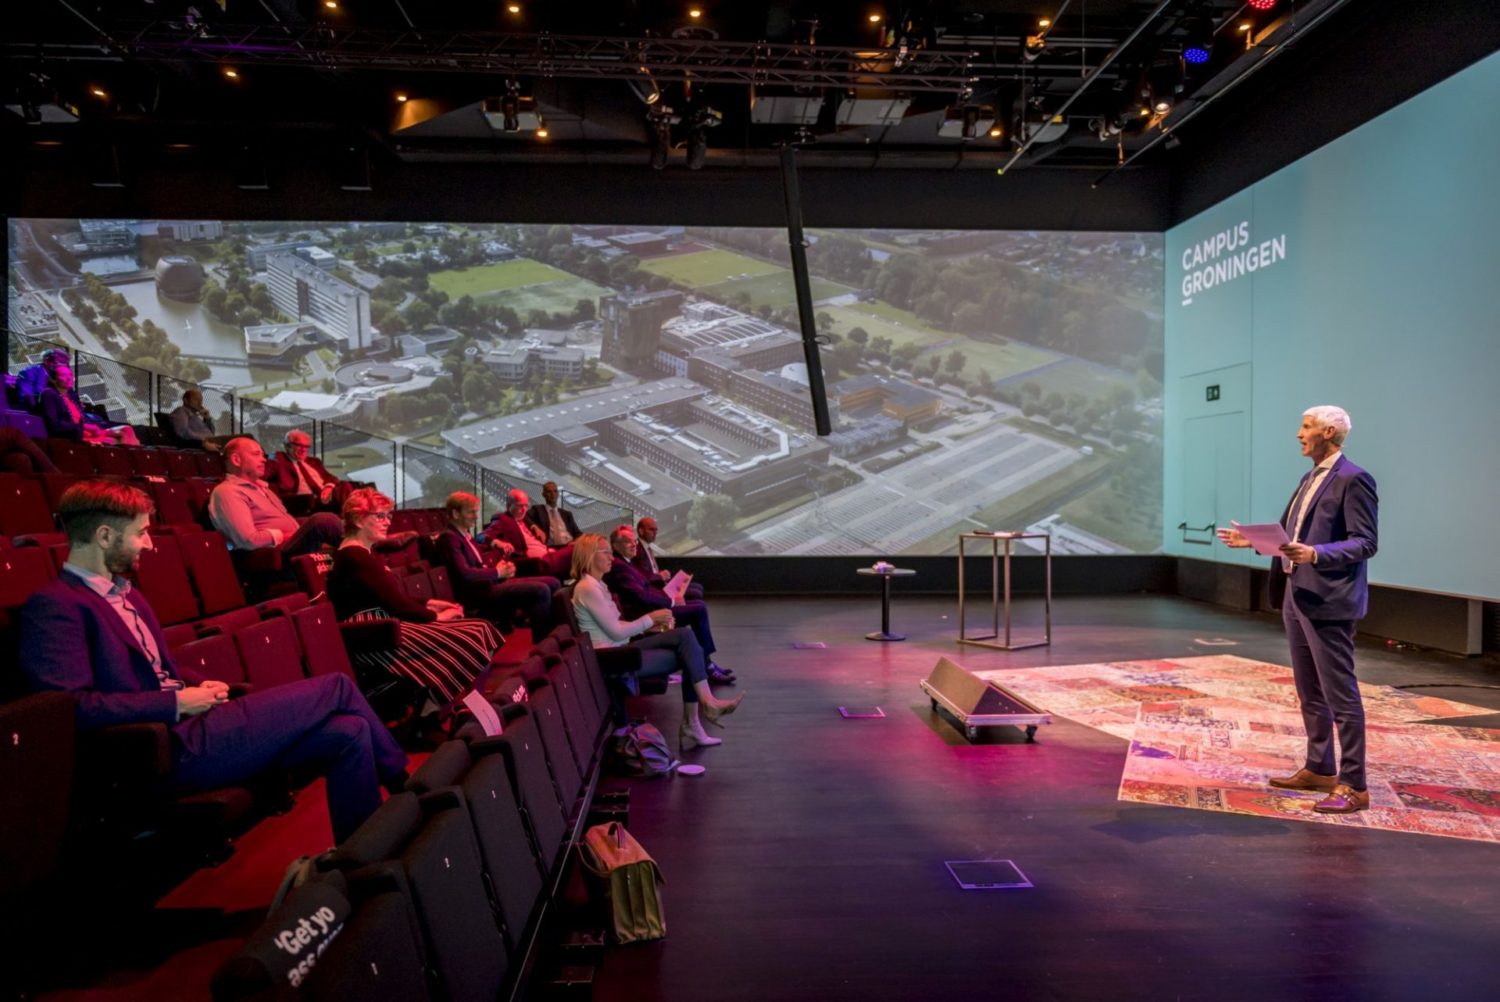 Campus Community Fund invests in Campus Groningen for impact on tomorrow's world